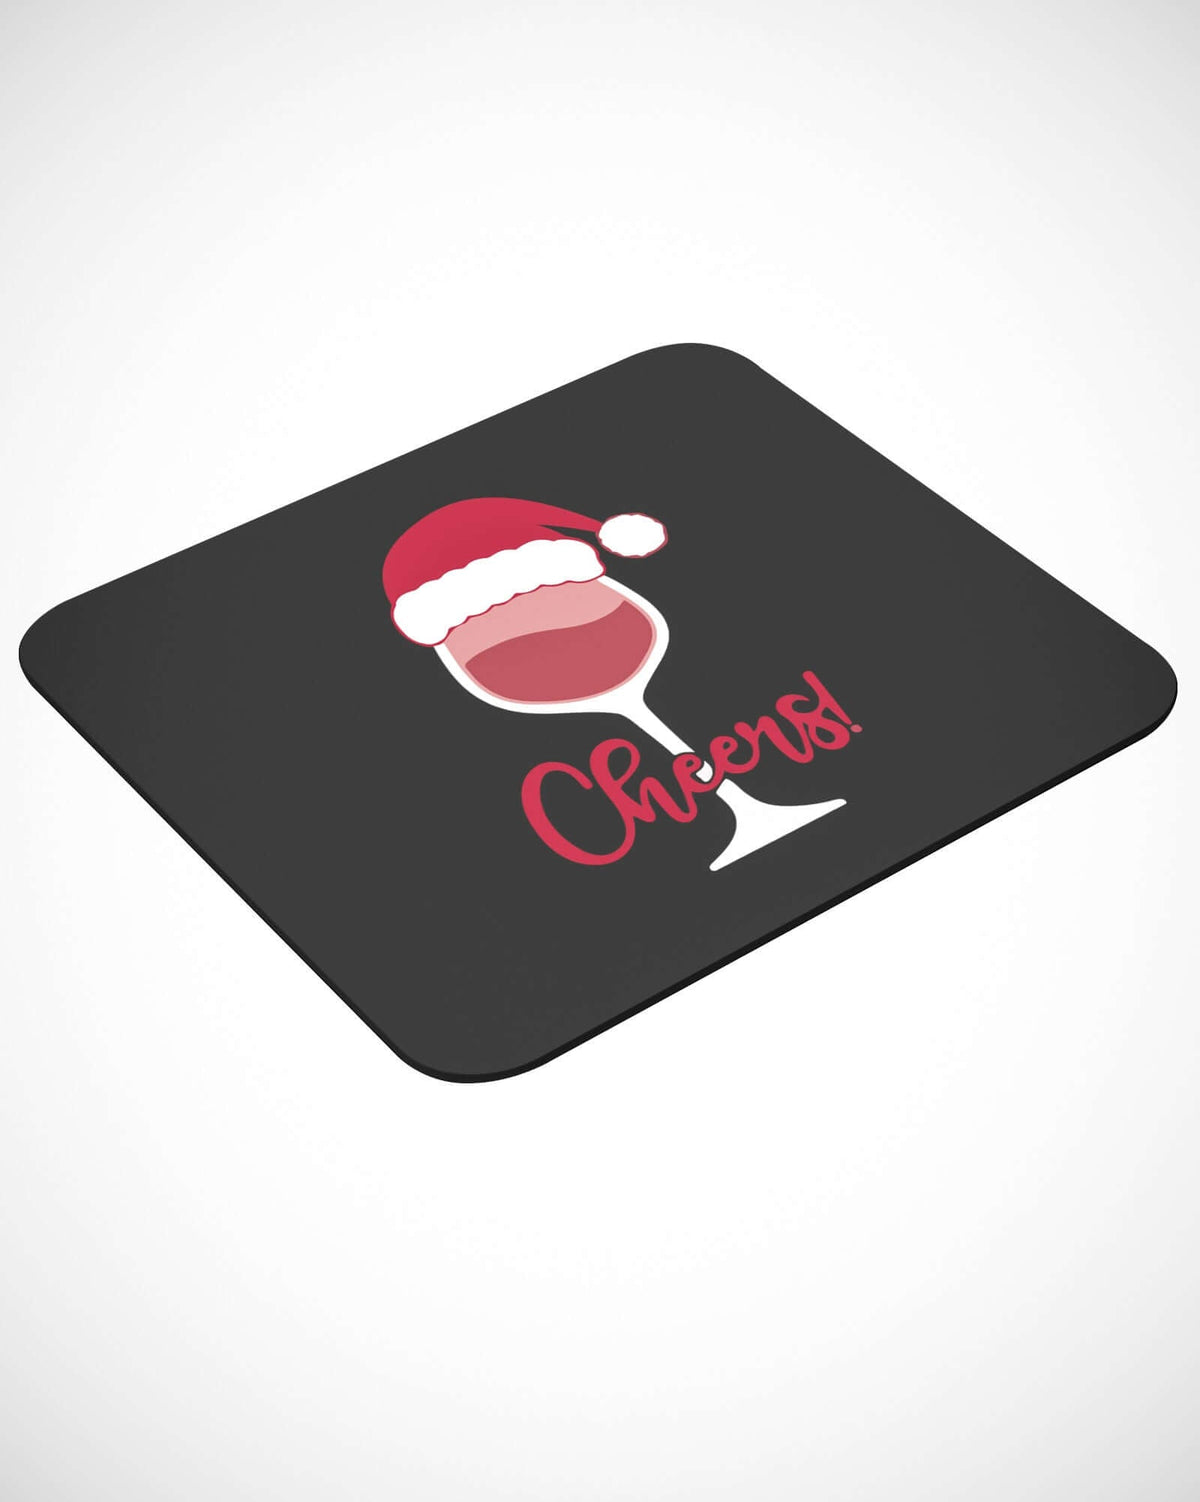 Cheers Christmas Funny Mouse pad - ApparelinClick